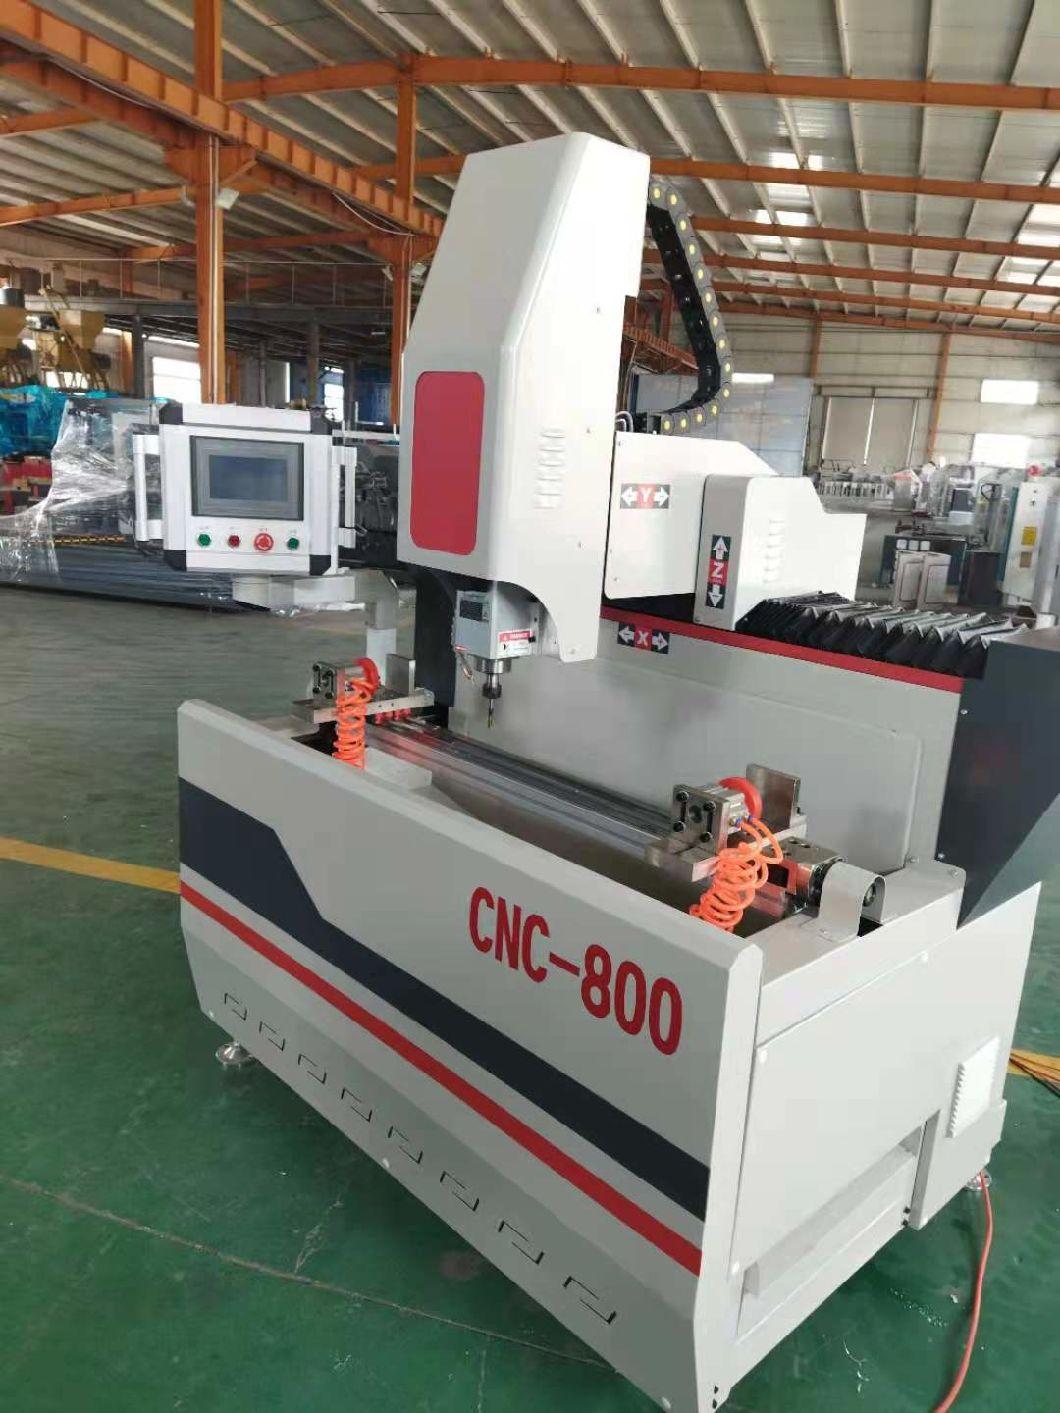 Lxf-CNC-800 CNC Drilling and Milling Machine for The Processing of Chamfering of Doors and Windows Alloy Profiles for Doors and Windows